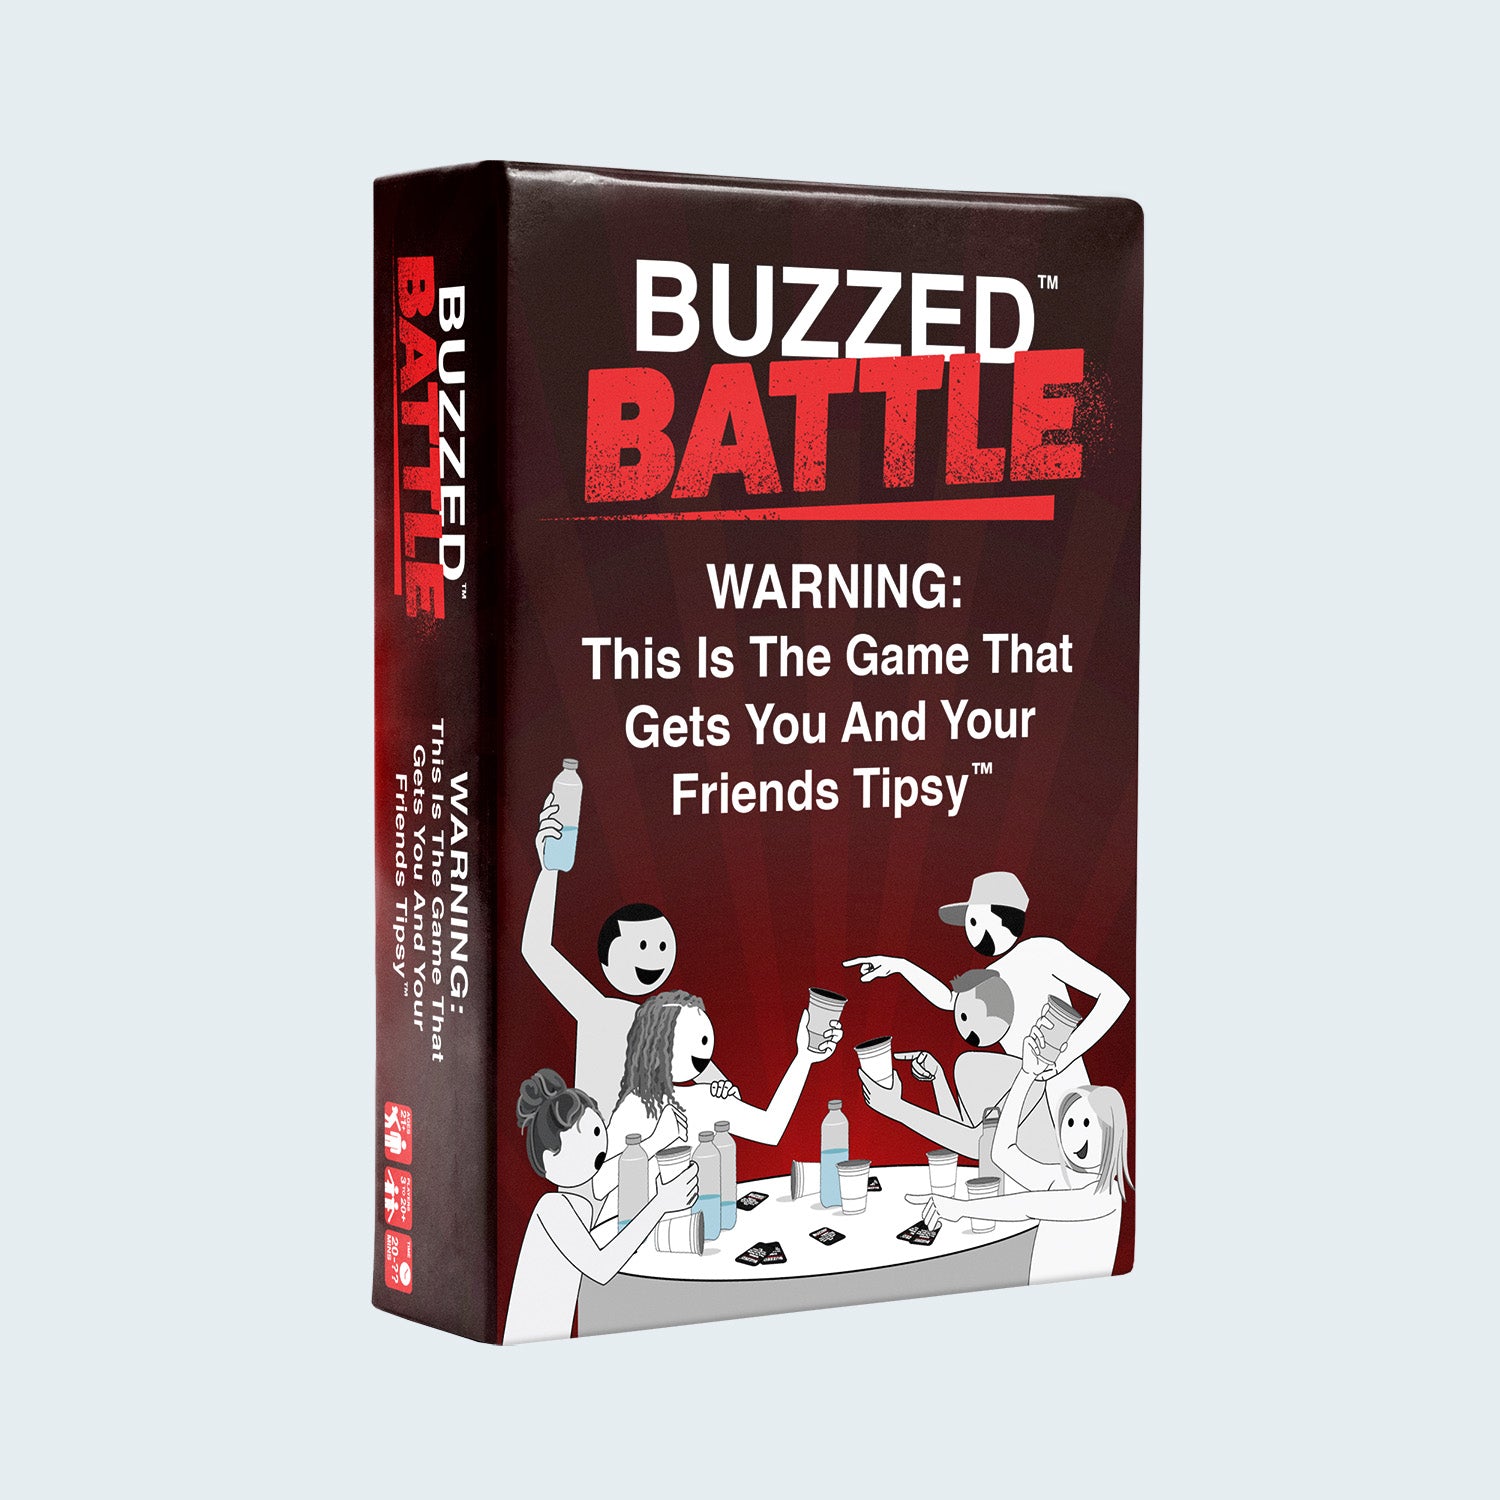 buzzed-battle-game-box-and-game-play-01-what-do-you-meme-by-relatable